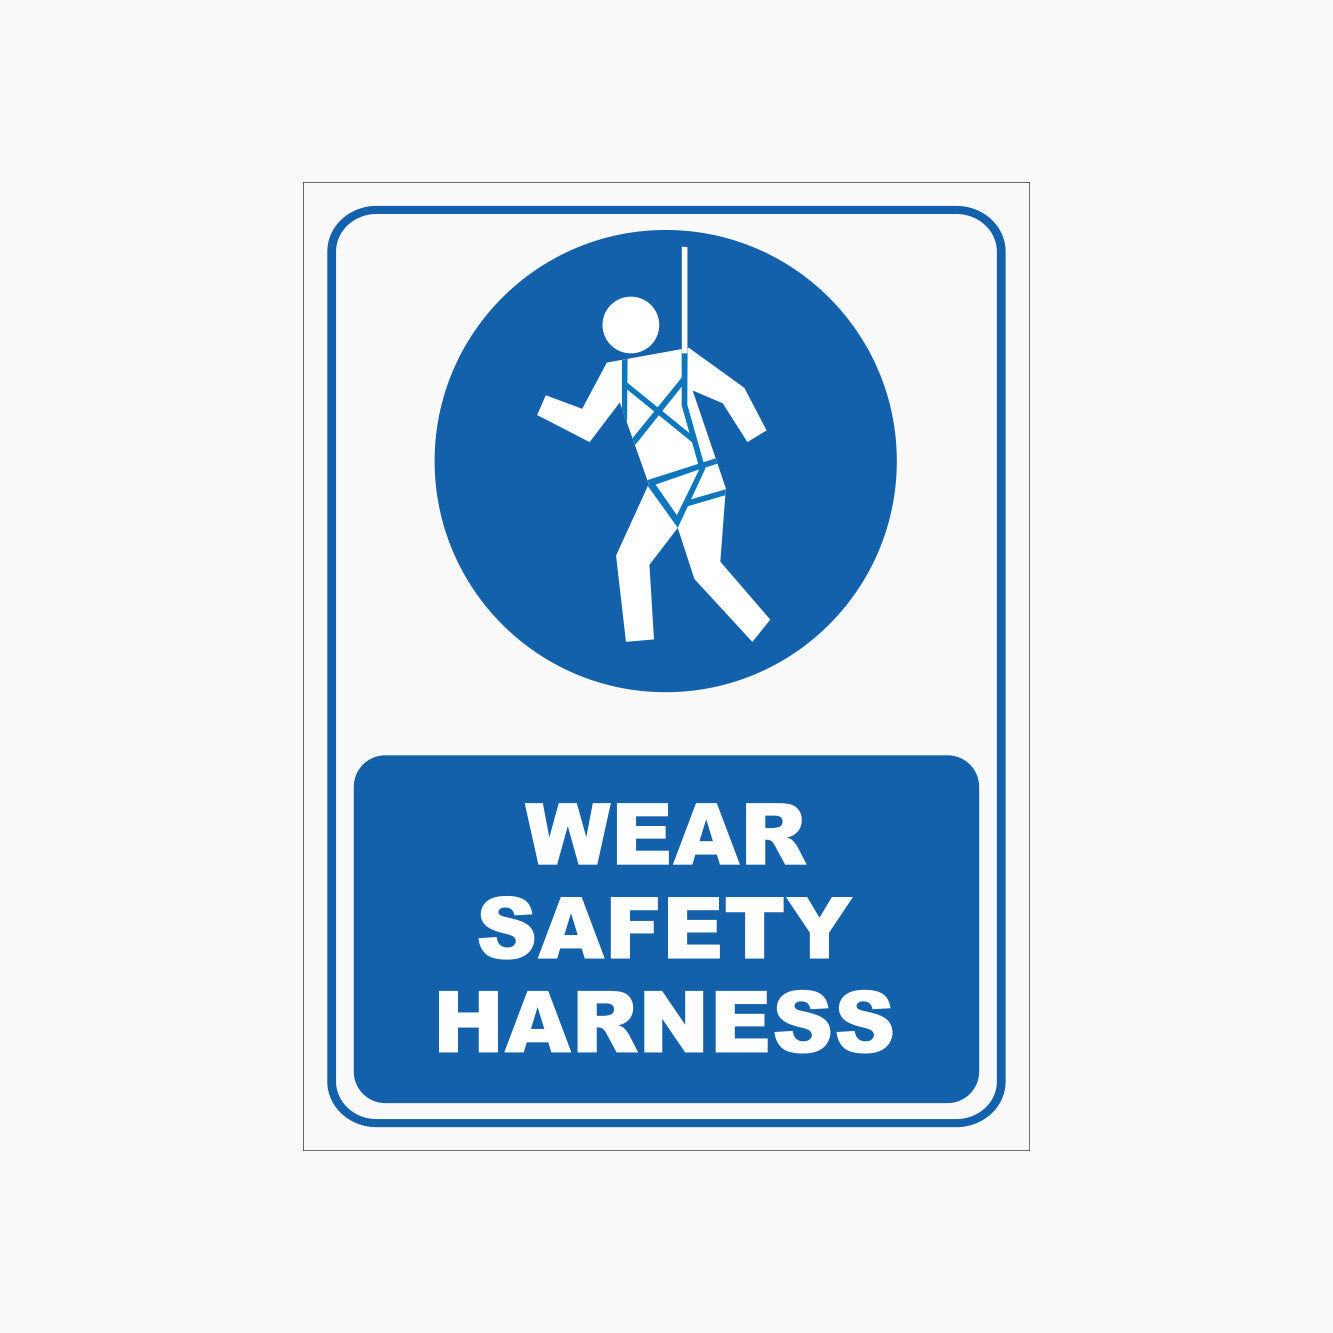 WEAR SAFETY HARNESS SIGN